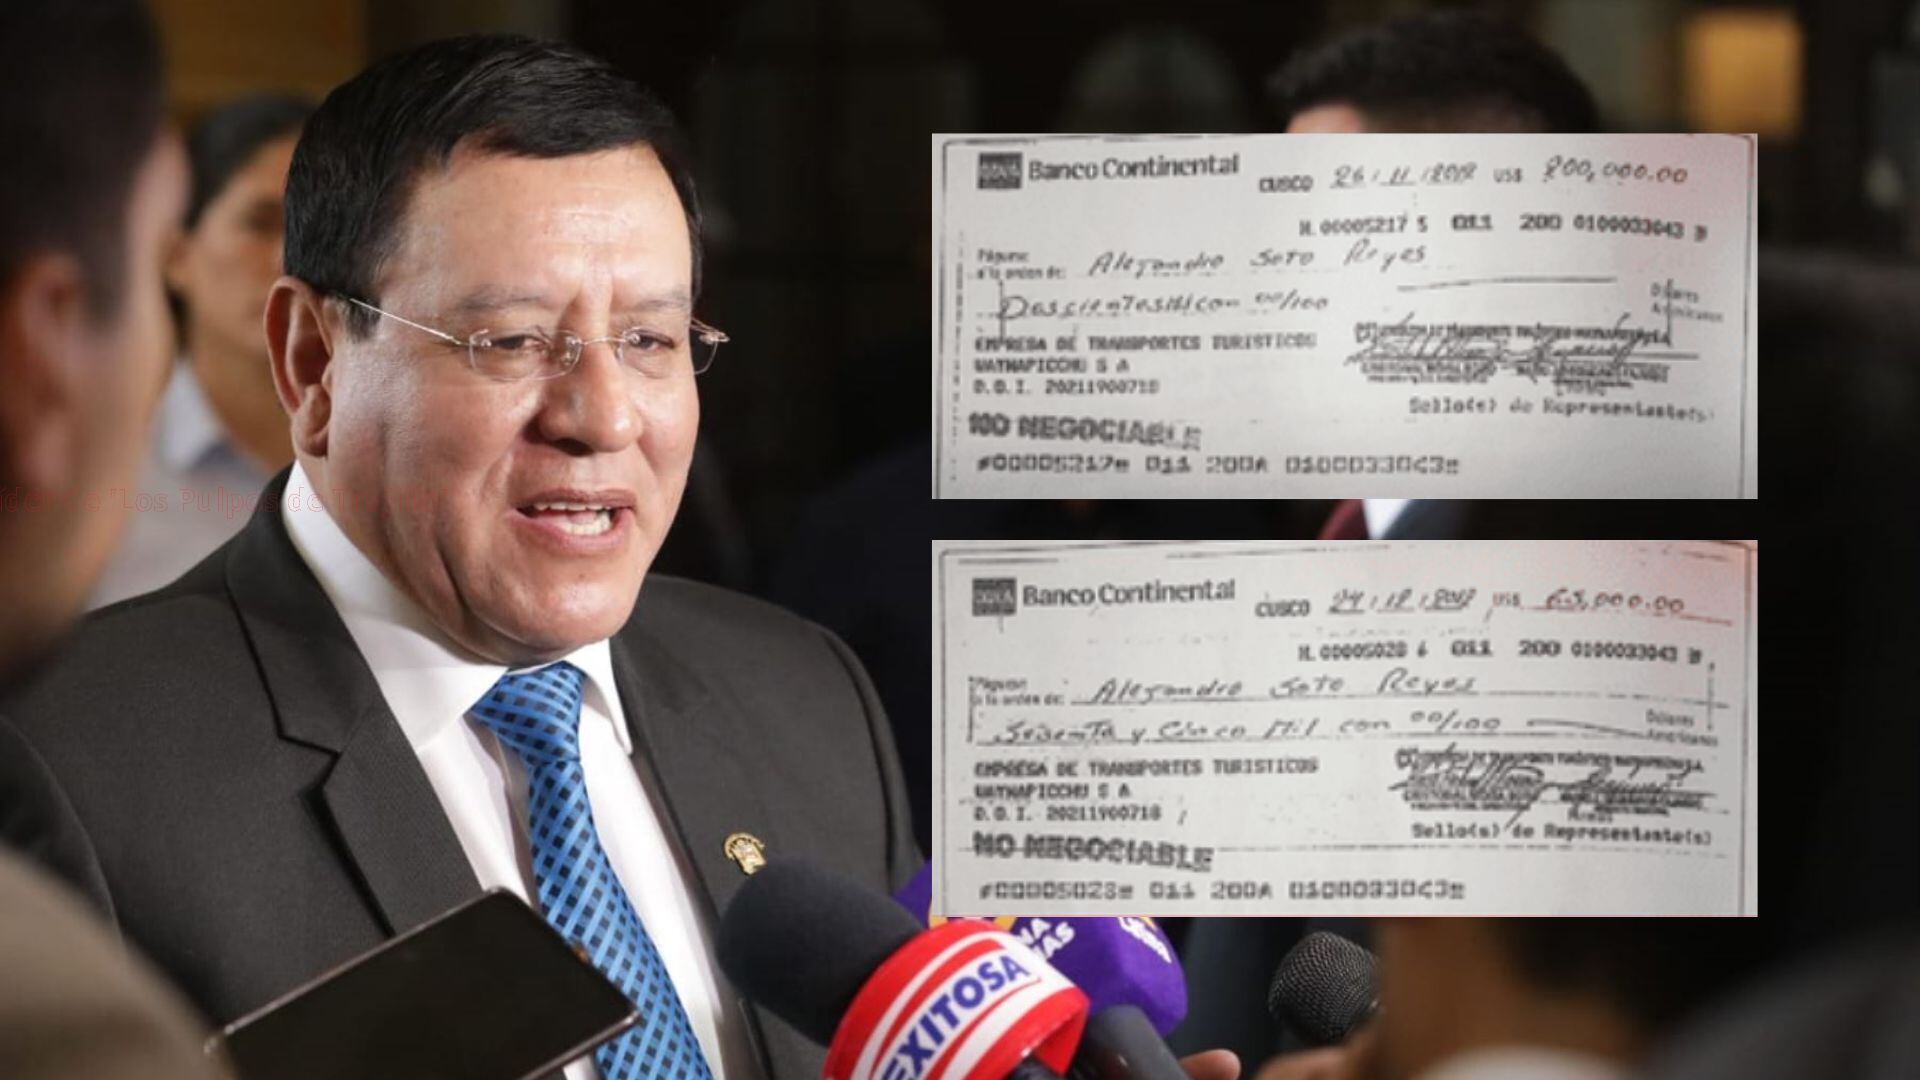 Photos of the checks he received for the sale of a property to Transportes Wayna Picchu.